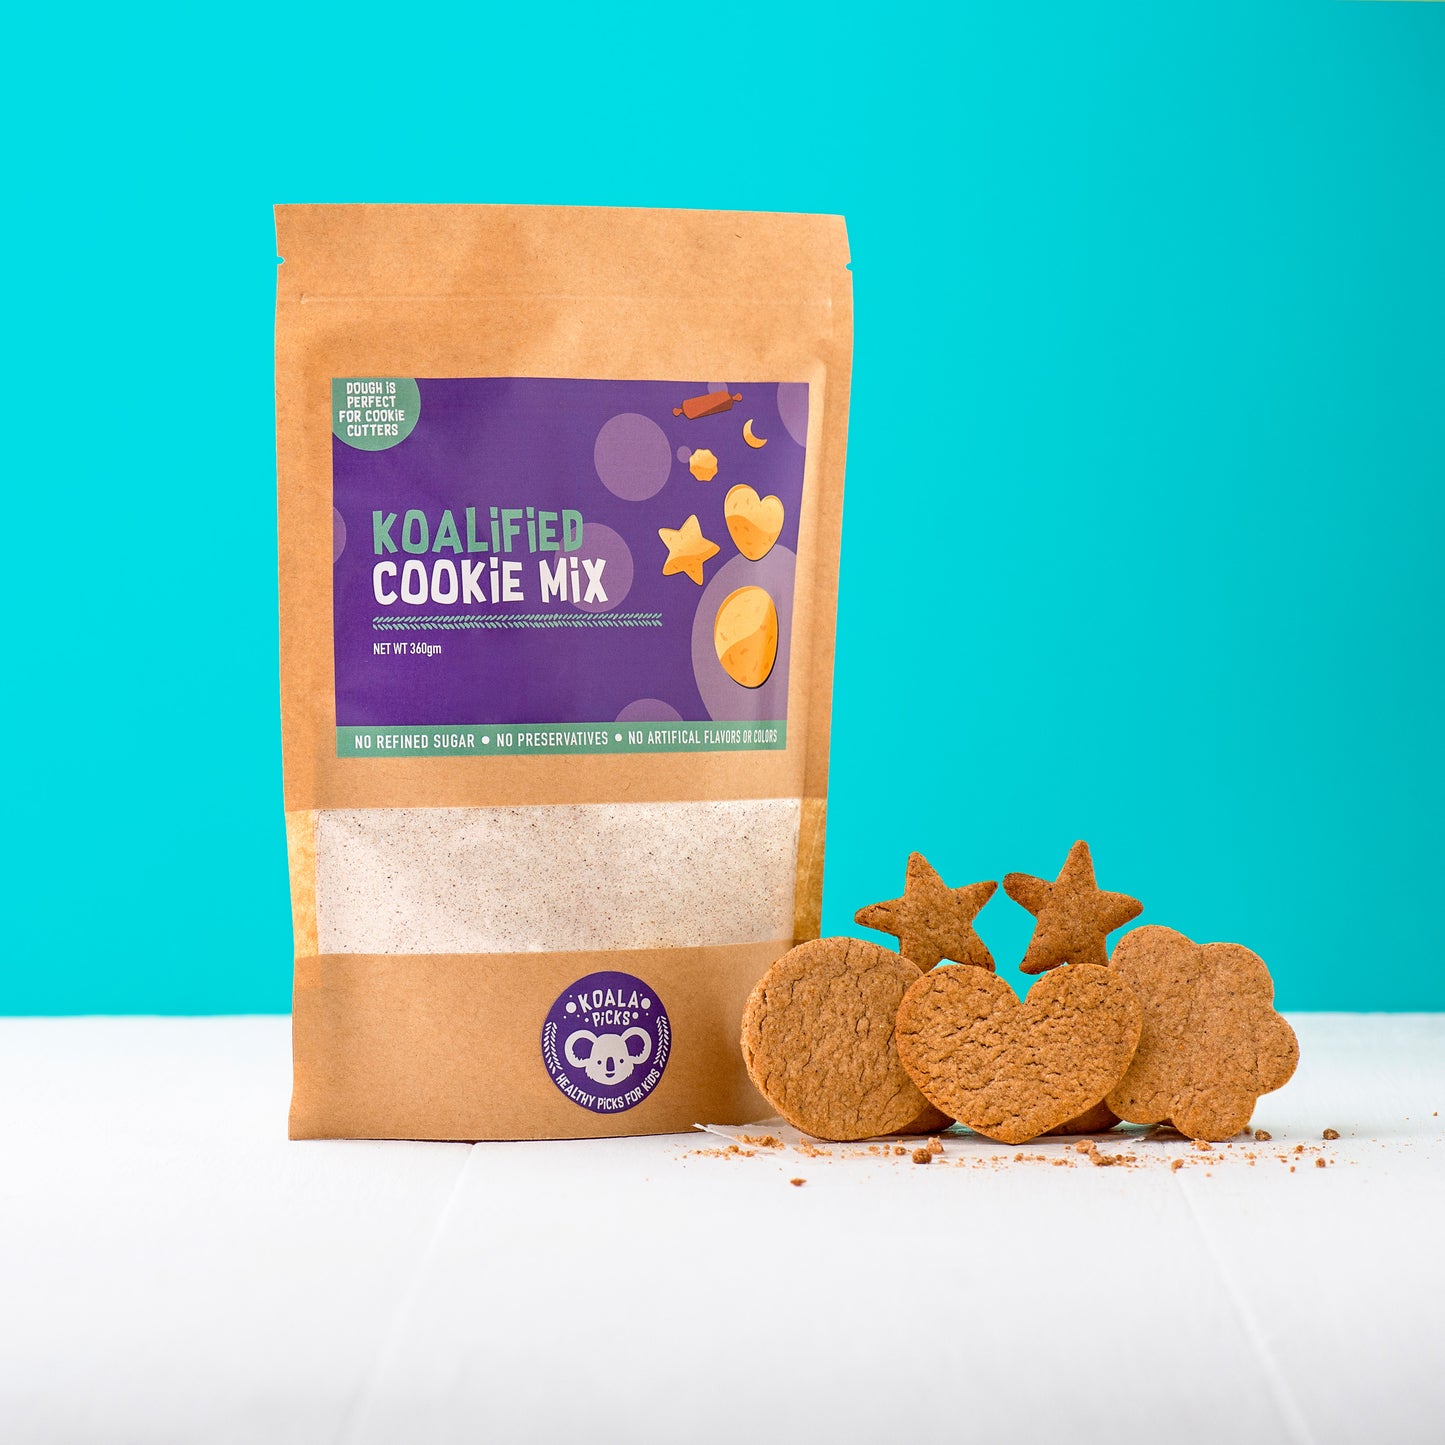 Koalified Cookie Mix (370g)